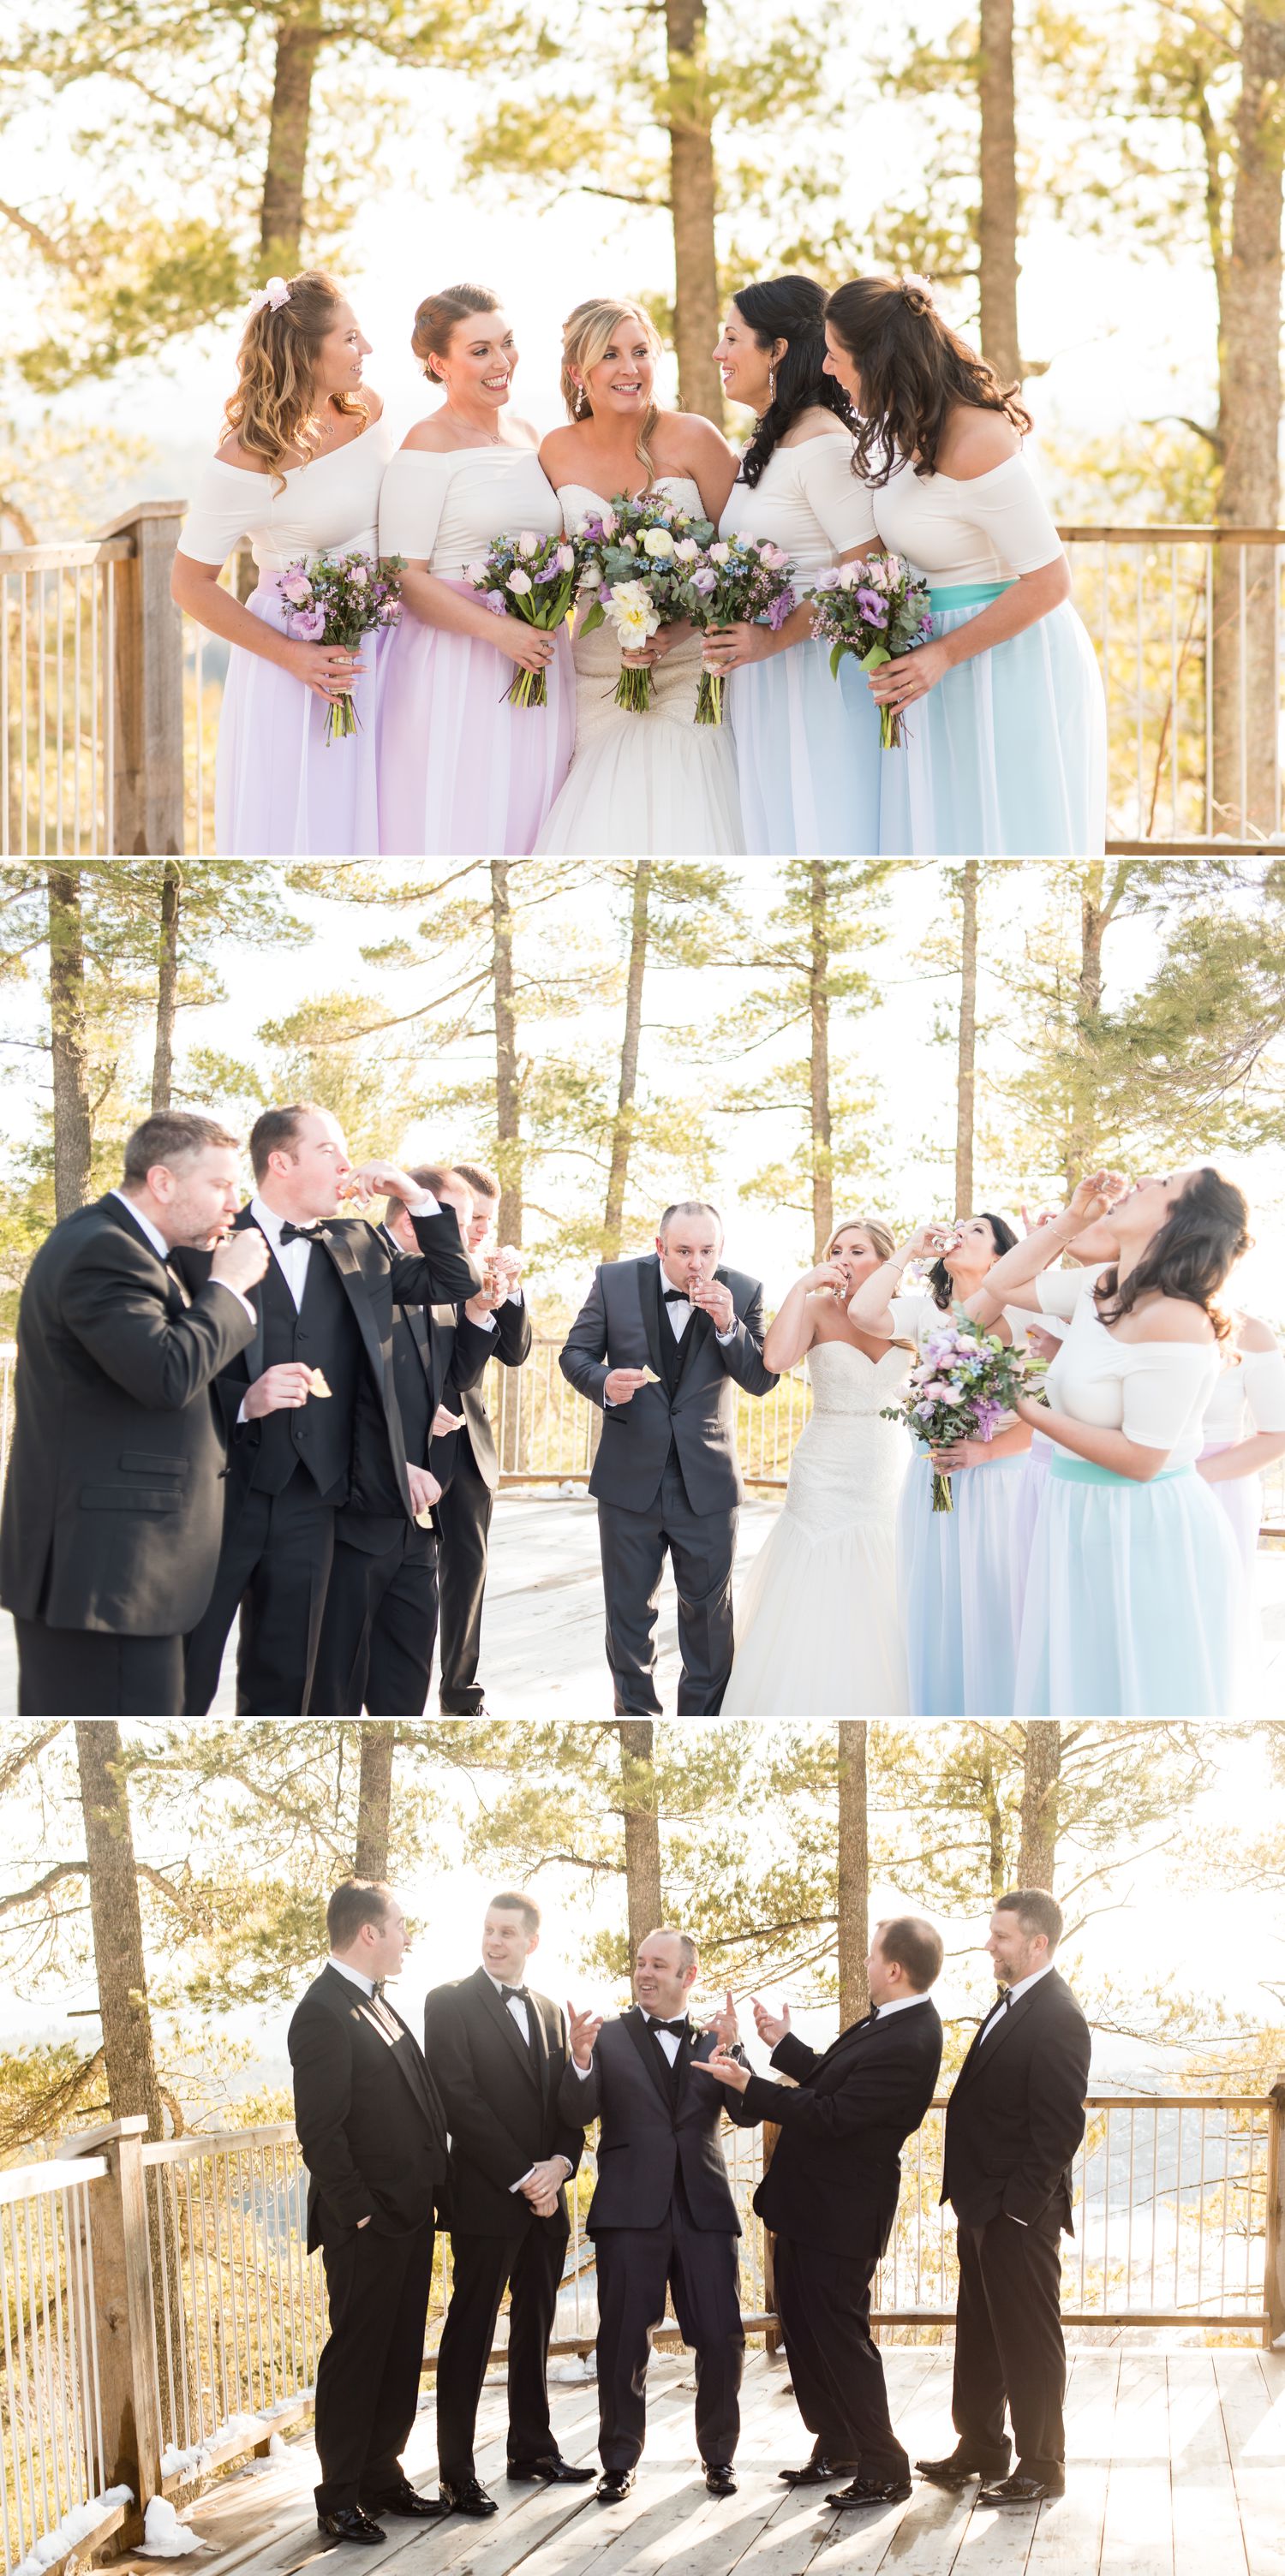 Group photos of the Bridesmaids and Groomsmen and then the group taking a shot together